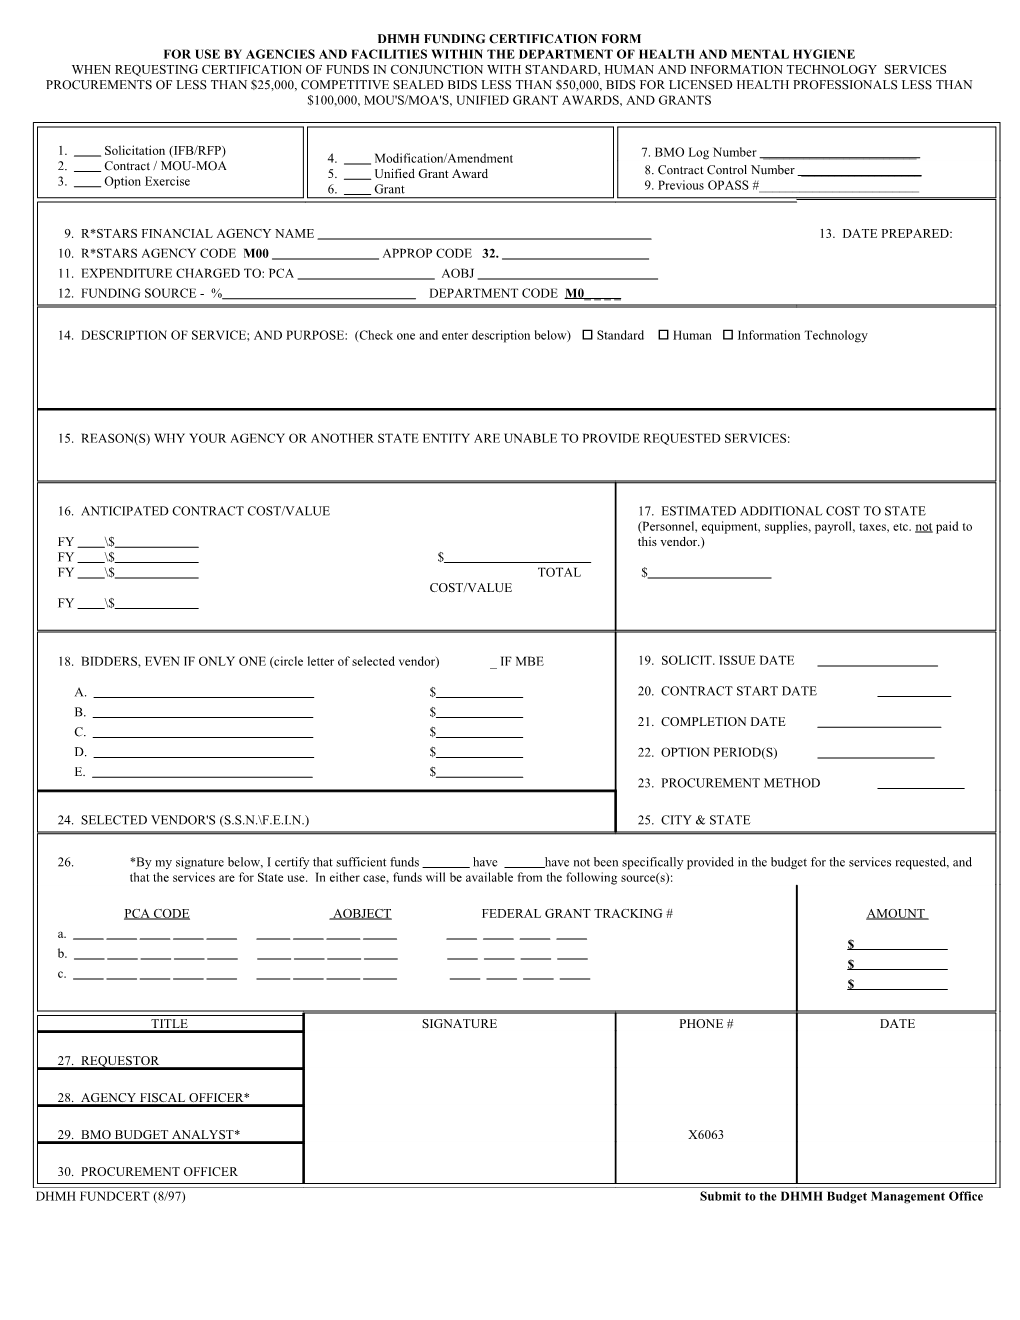 Dhmh Funding Certification Form